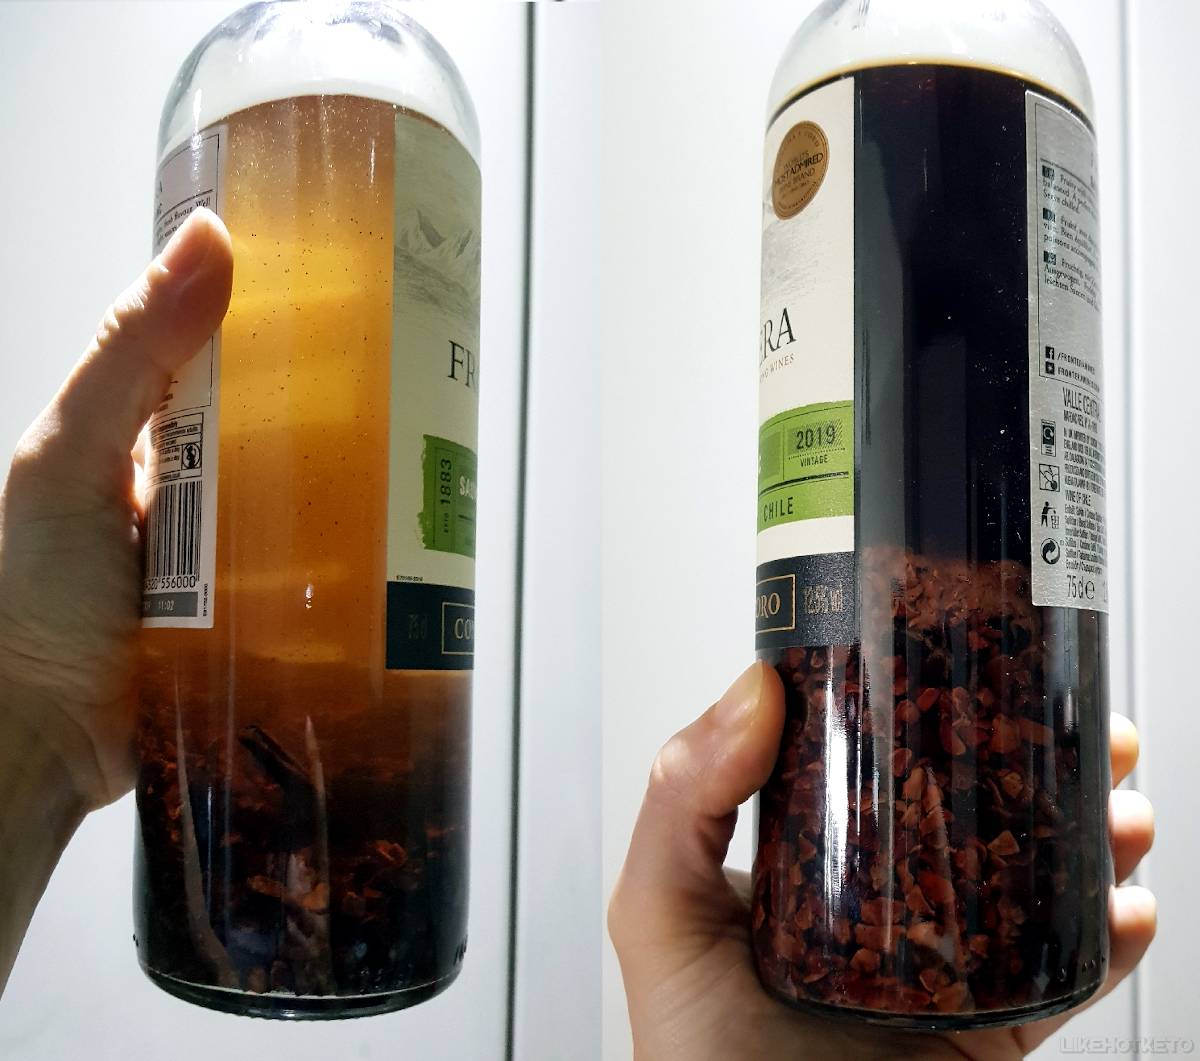 Side by side comparison of the cacao nibs vodka infusion on day 1 and on day 45.